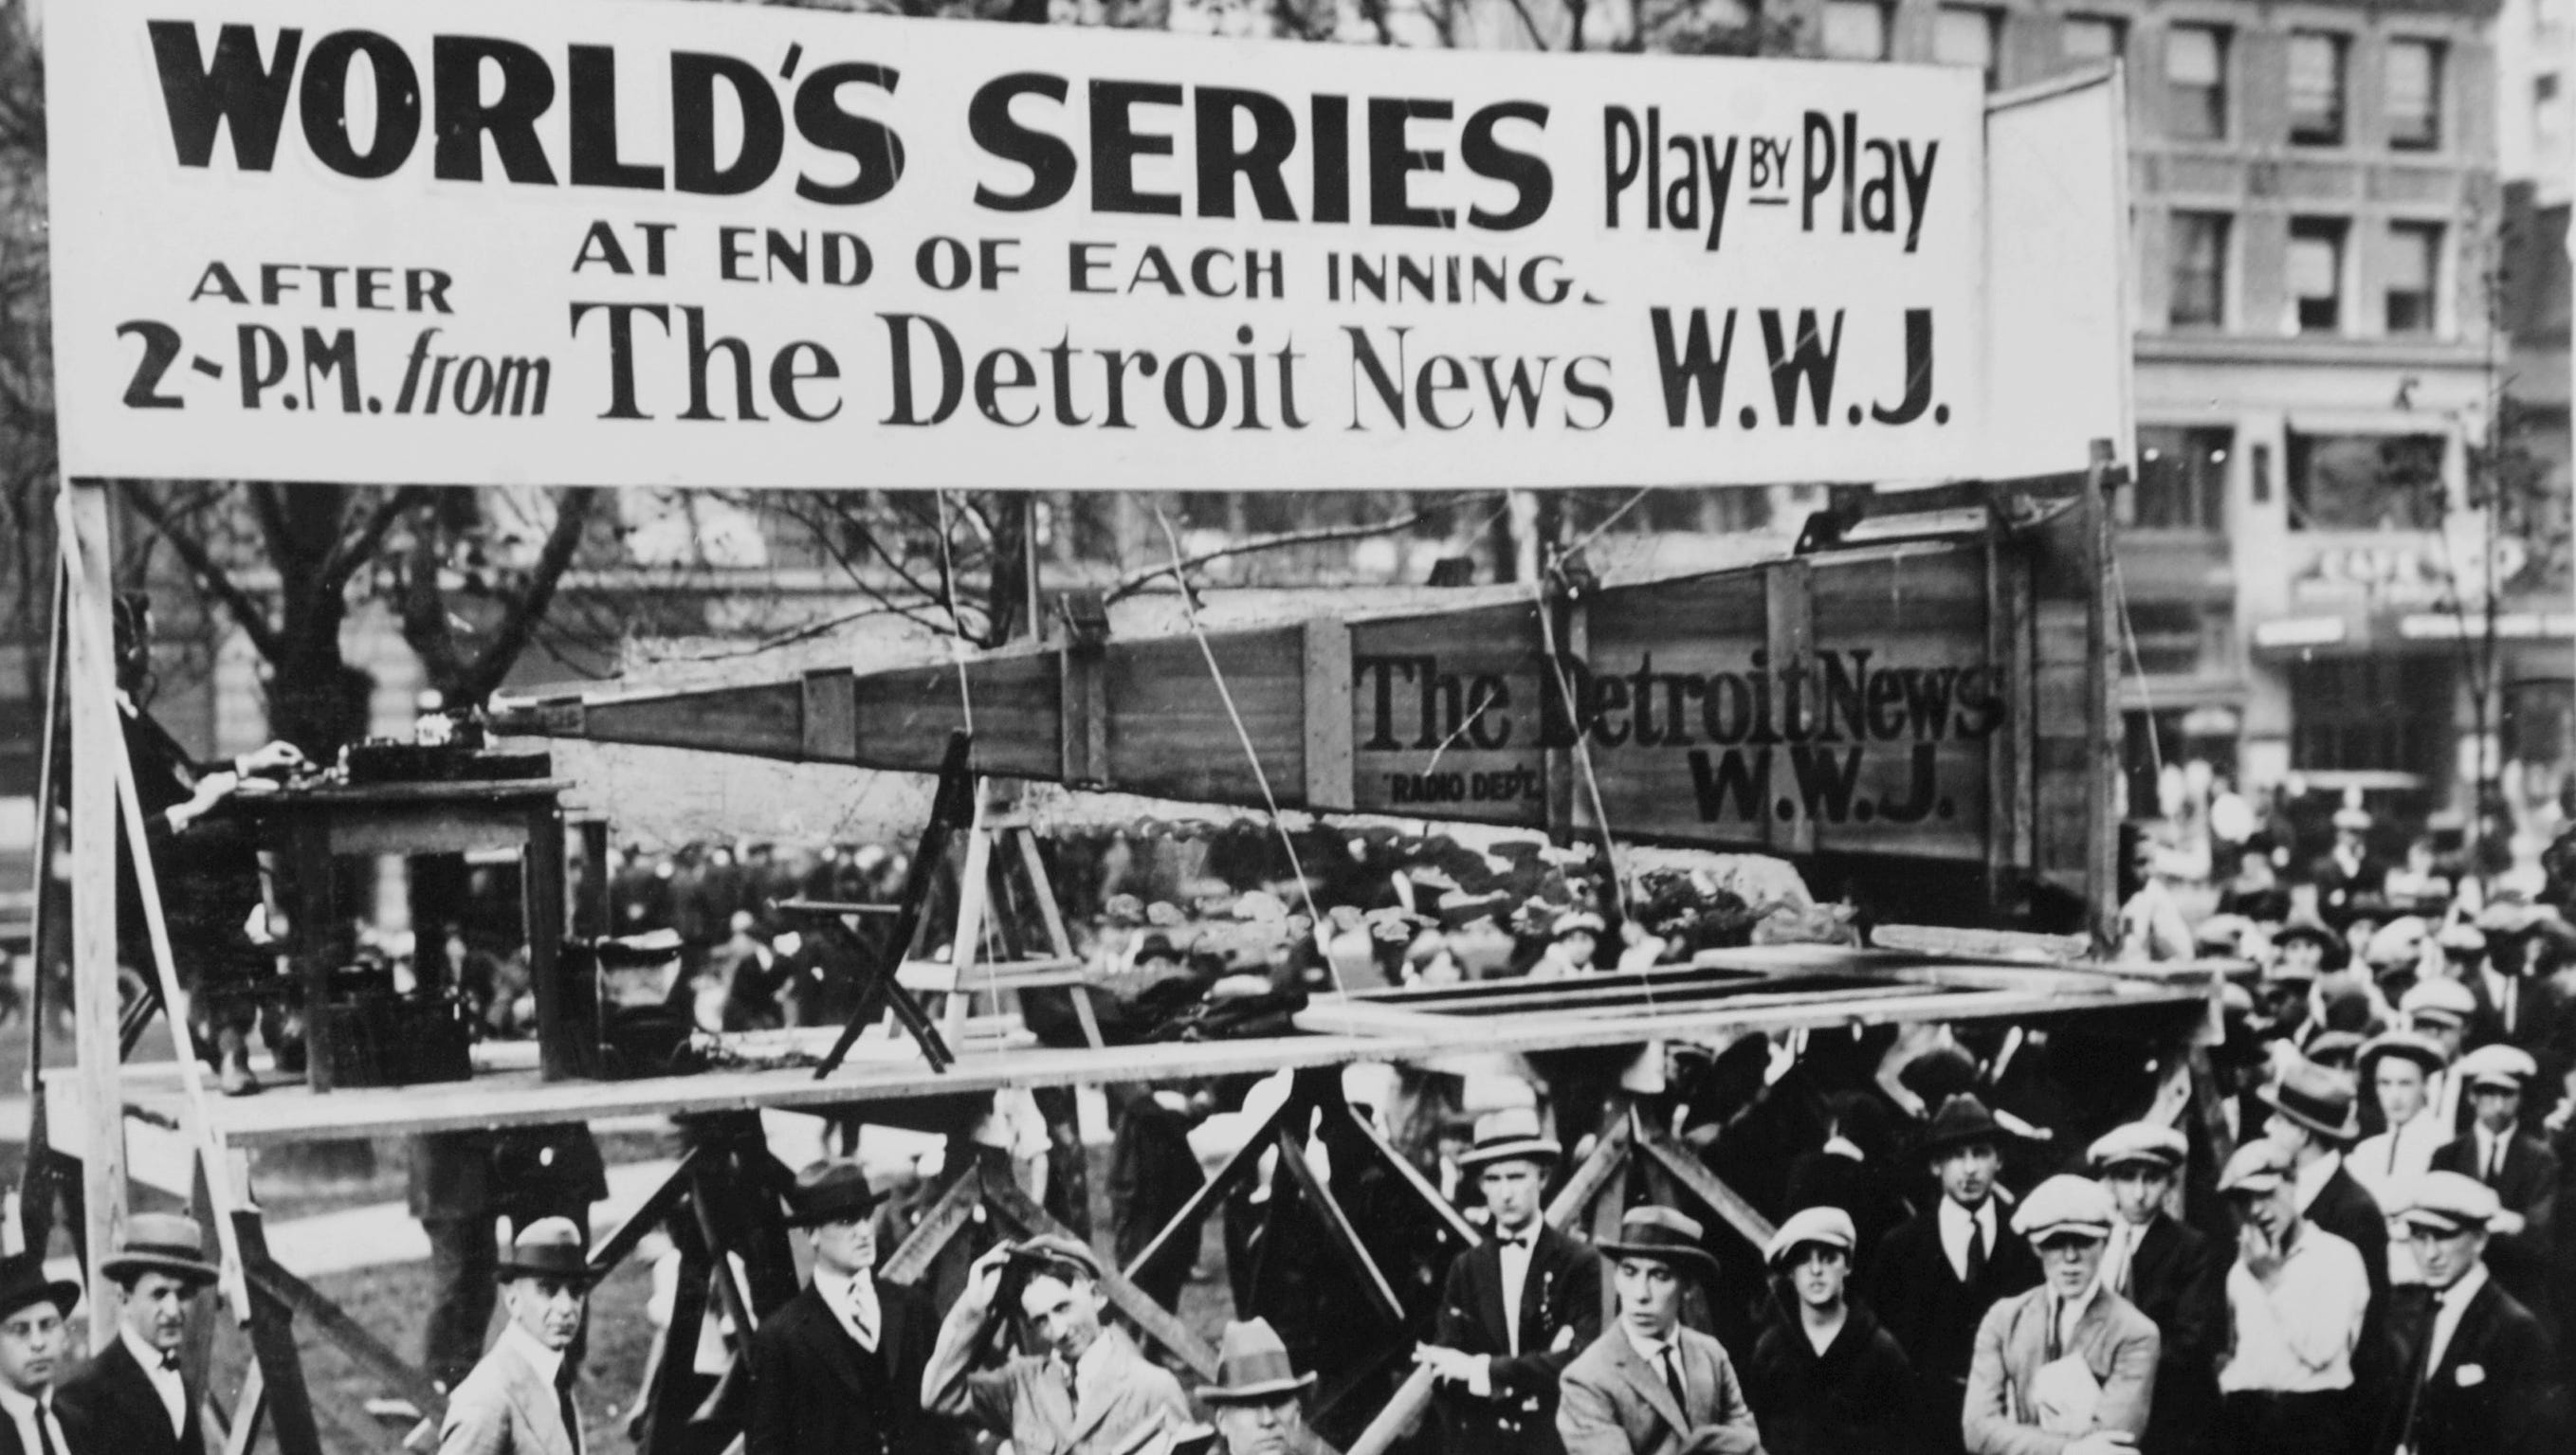 WWJ's first World Series broadcast was in 1922, when the New York Giants defeated the New York Yankees.  The play-by-play was recreated at the end of each inning and broadcast through a loudspeaker in Detroit's Grand Circus Park.